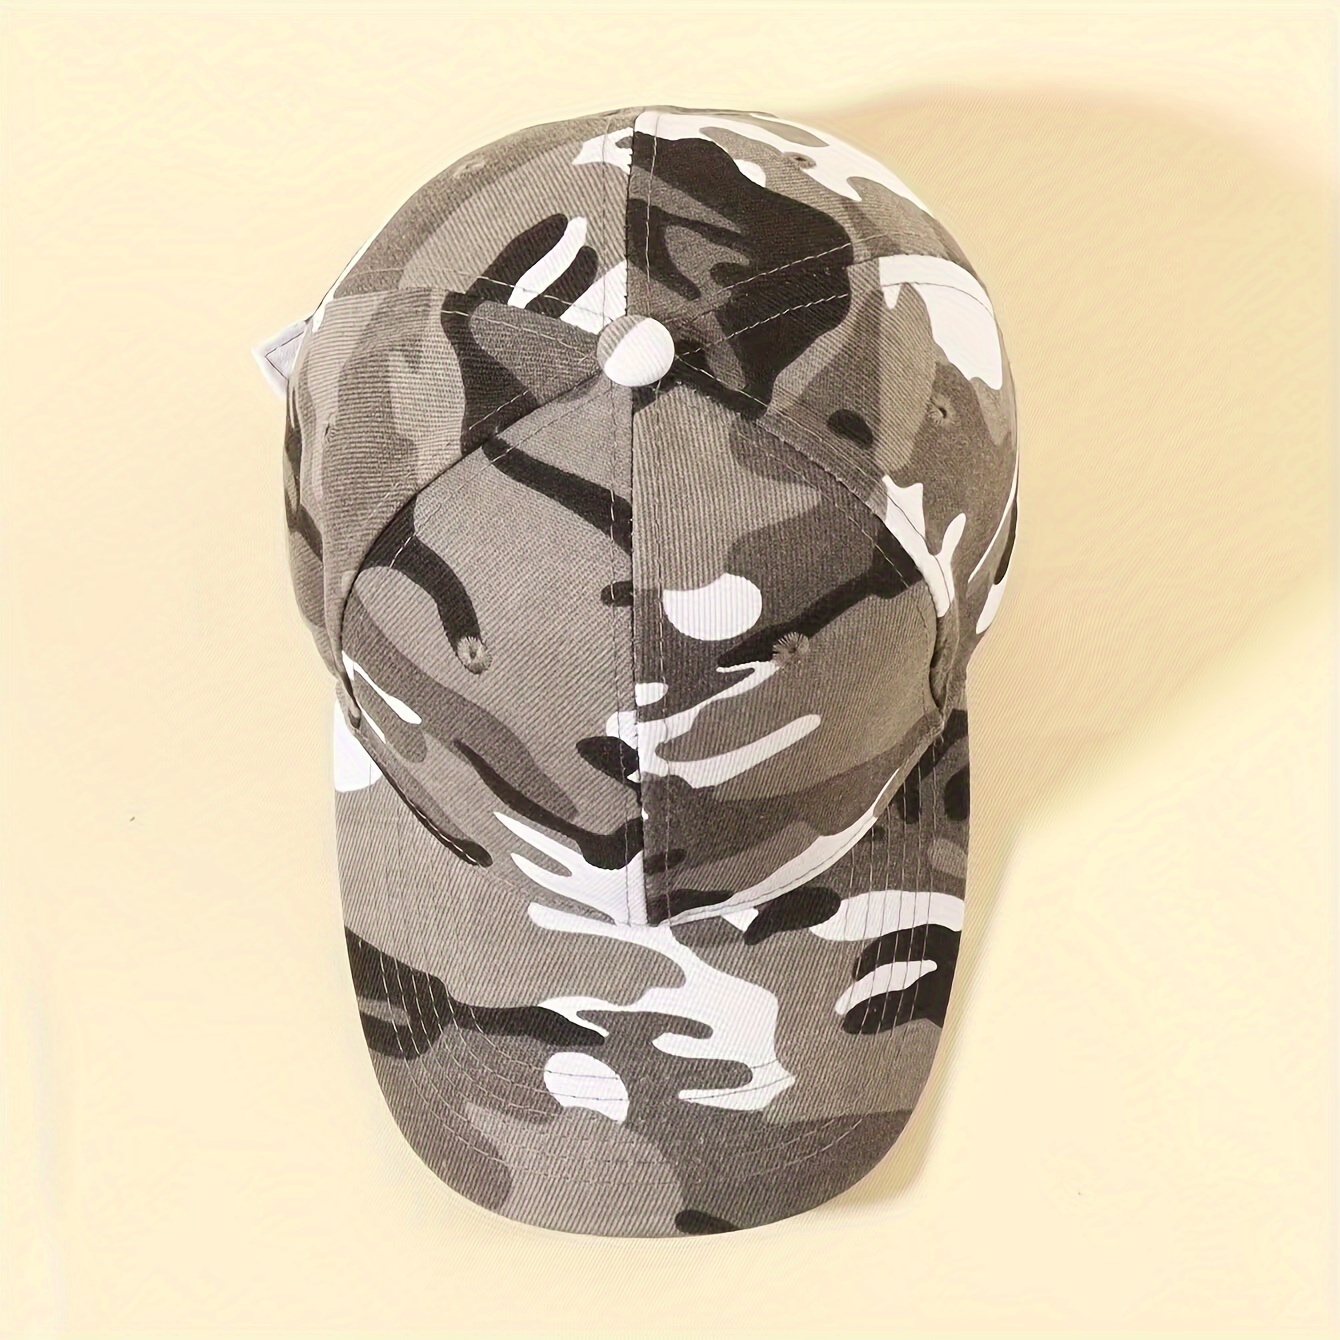 Outdoor Camouflage Hat Baseball Caps Simplicity Army Green Camo Hunting Cap  Hats Sport Cycling Caps For Men Women Adult 